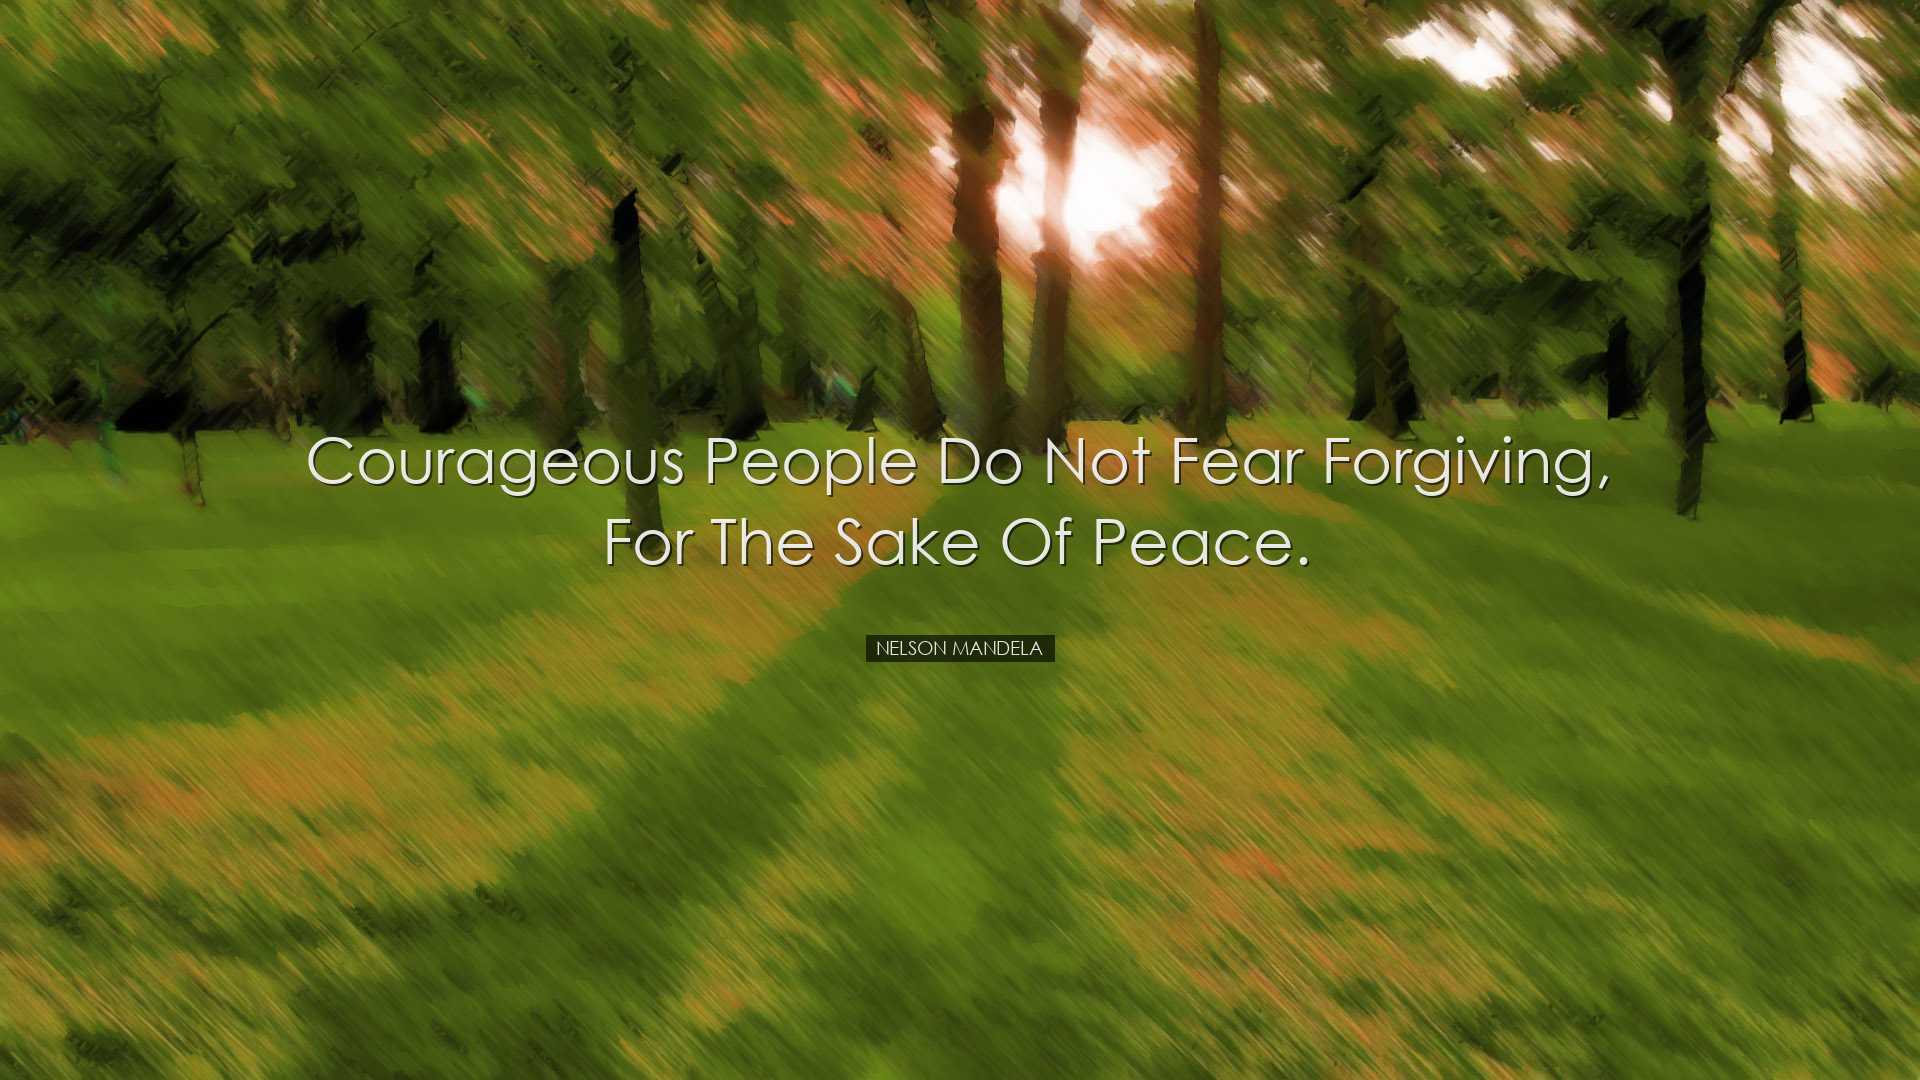 Courageous people do not fear forgiving, for the sake of peace. -